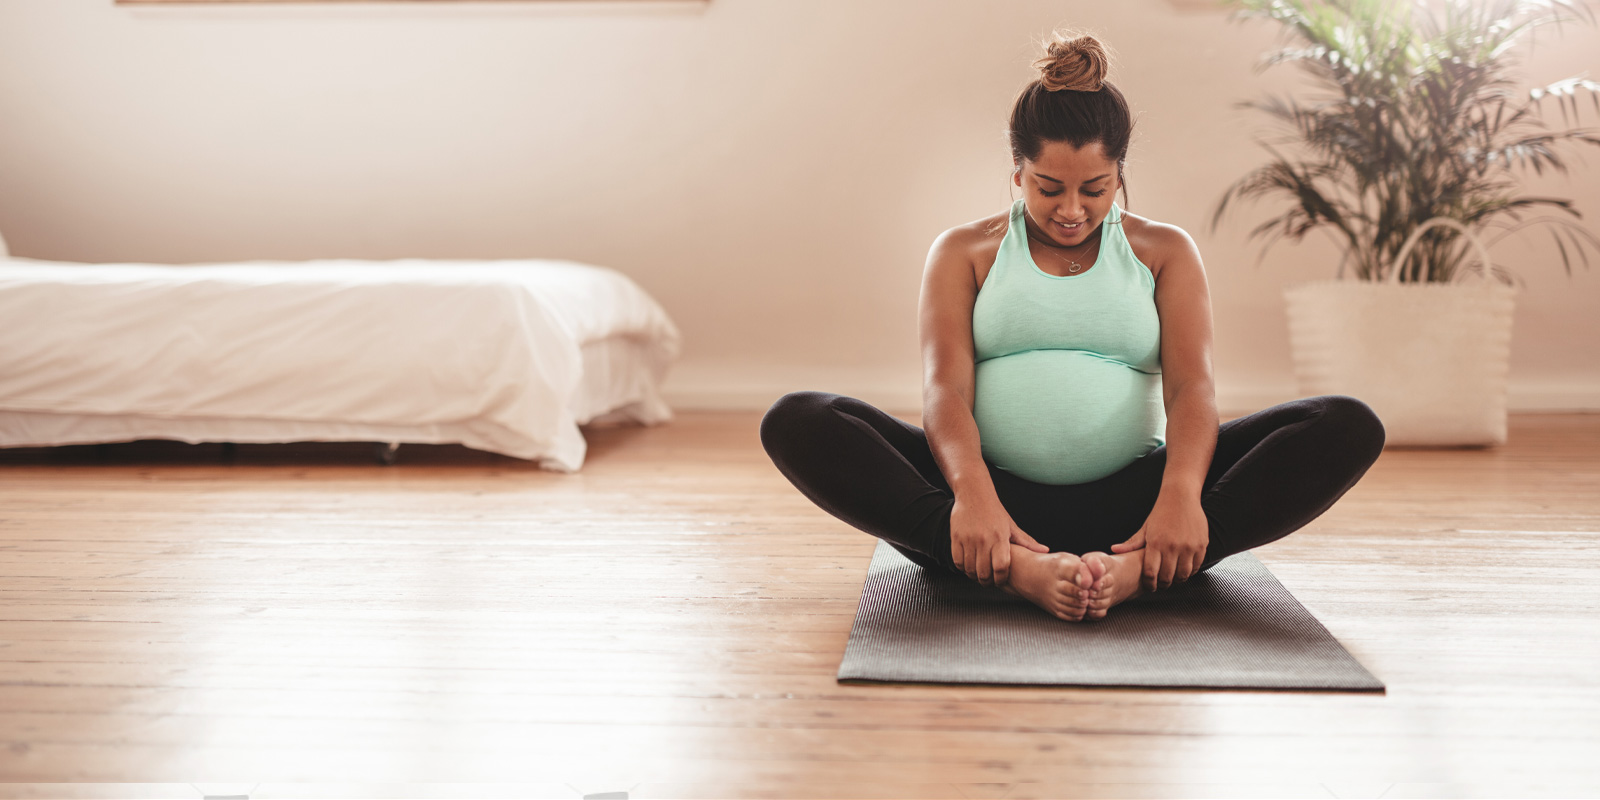 Reduce Mothers' Stress Now to Improve Mental Health for the Next